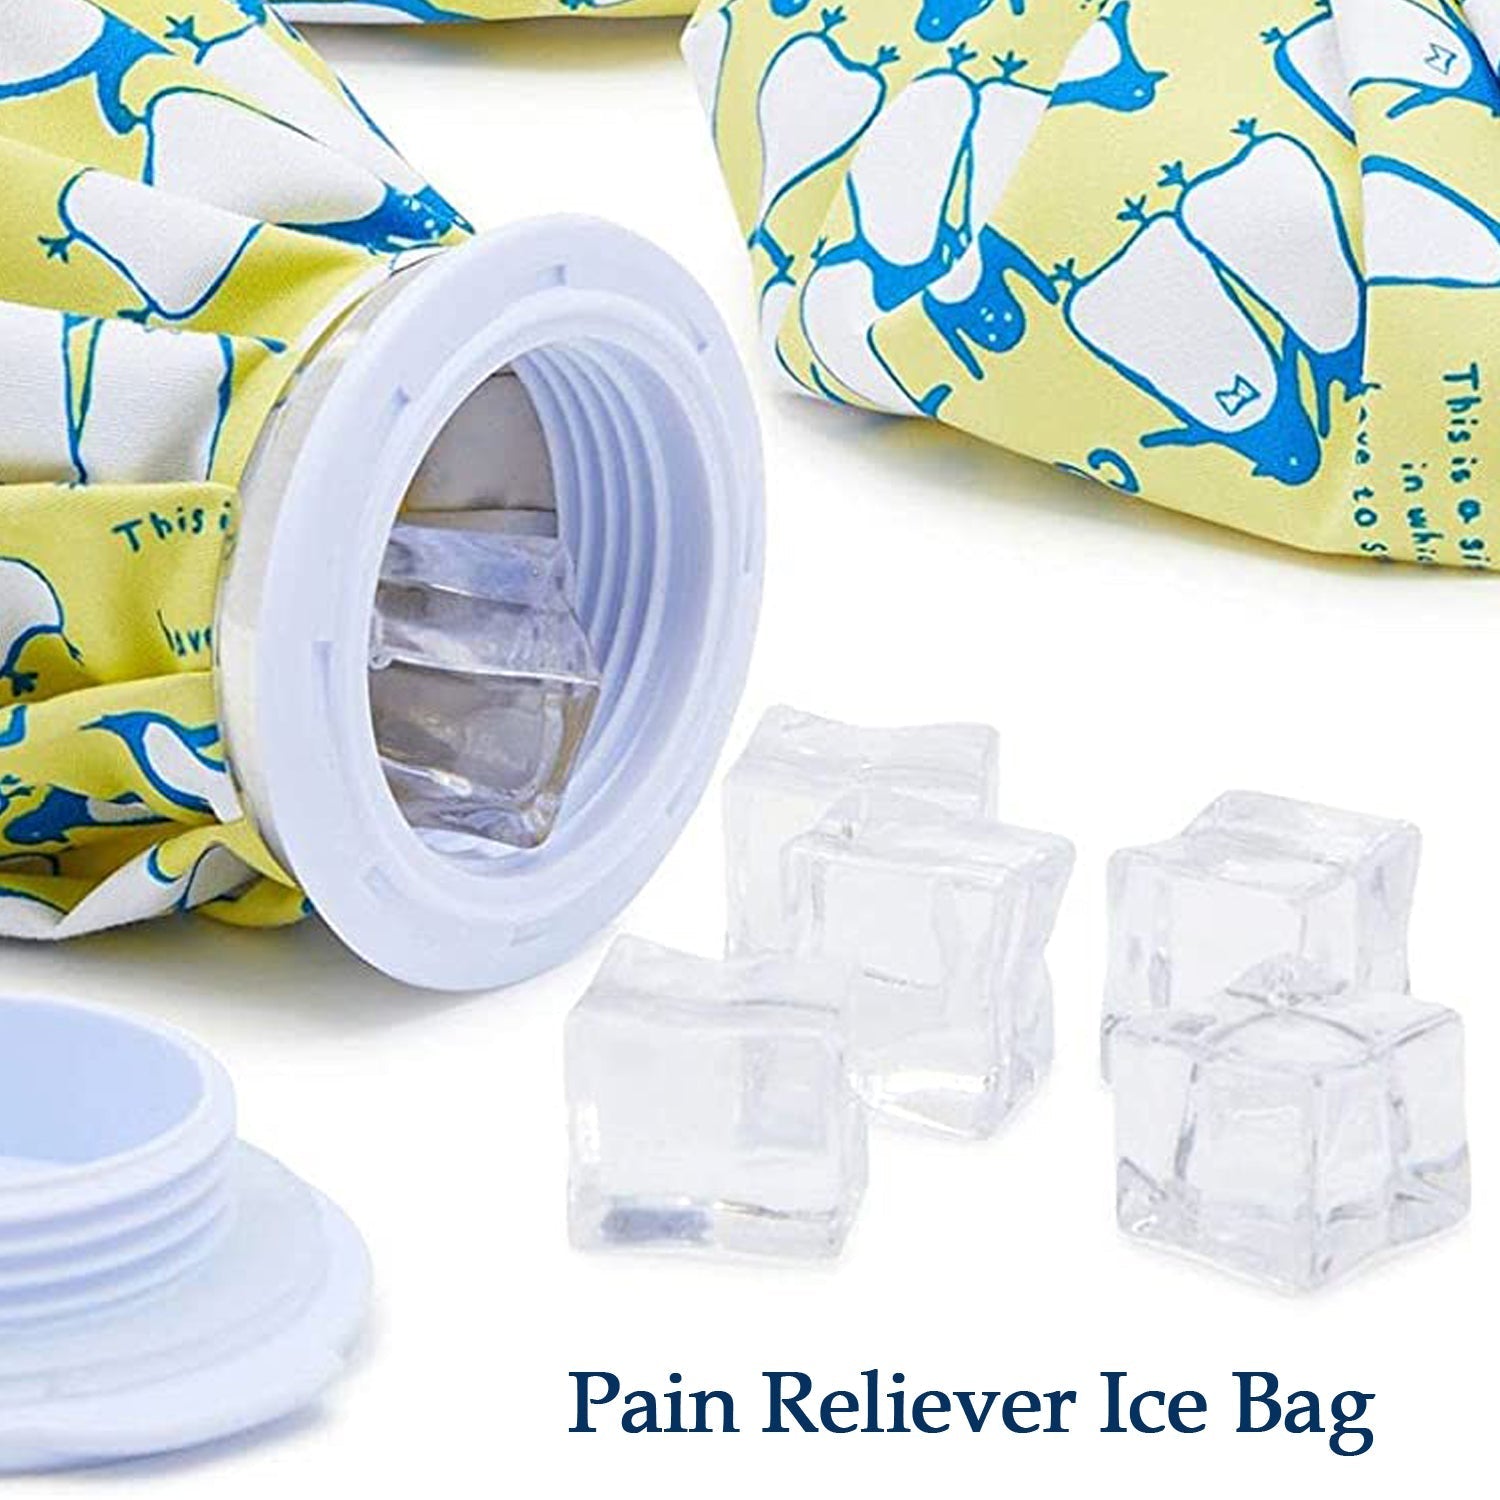 6167 S Pain Reliever Ice Bag Used To Overcome Joints And Muscles Pain In The Body. freeshipping - DeoDap